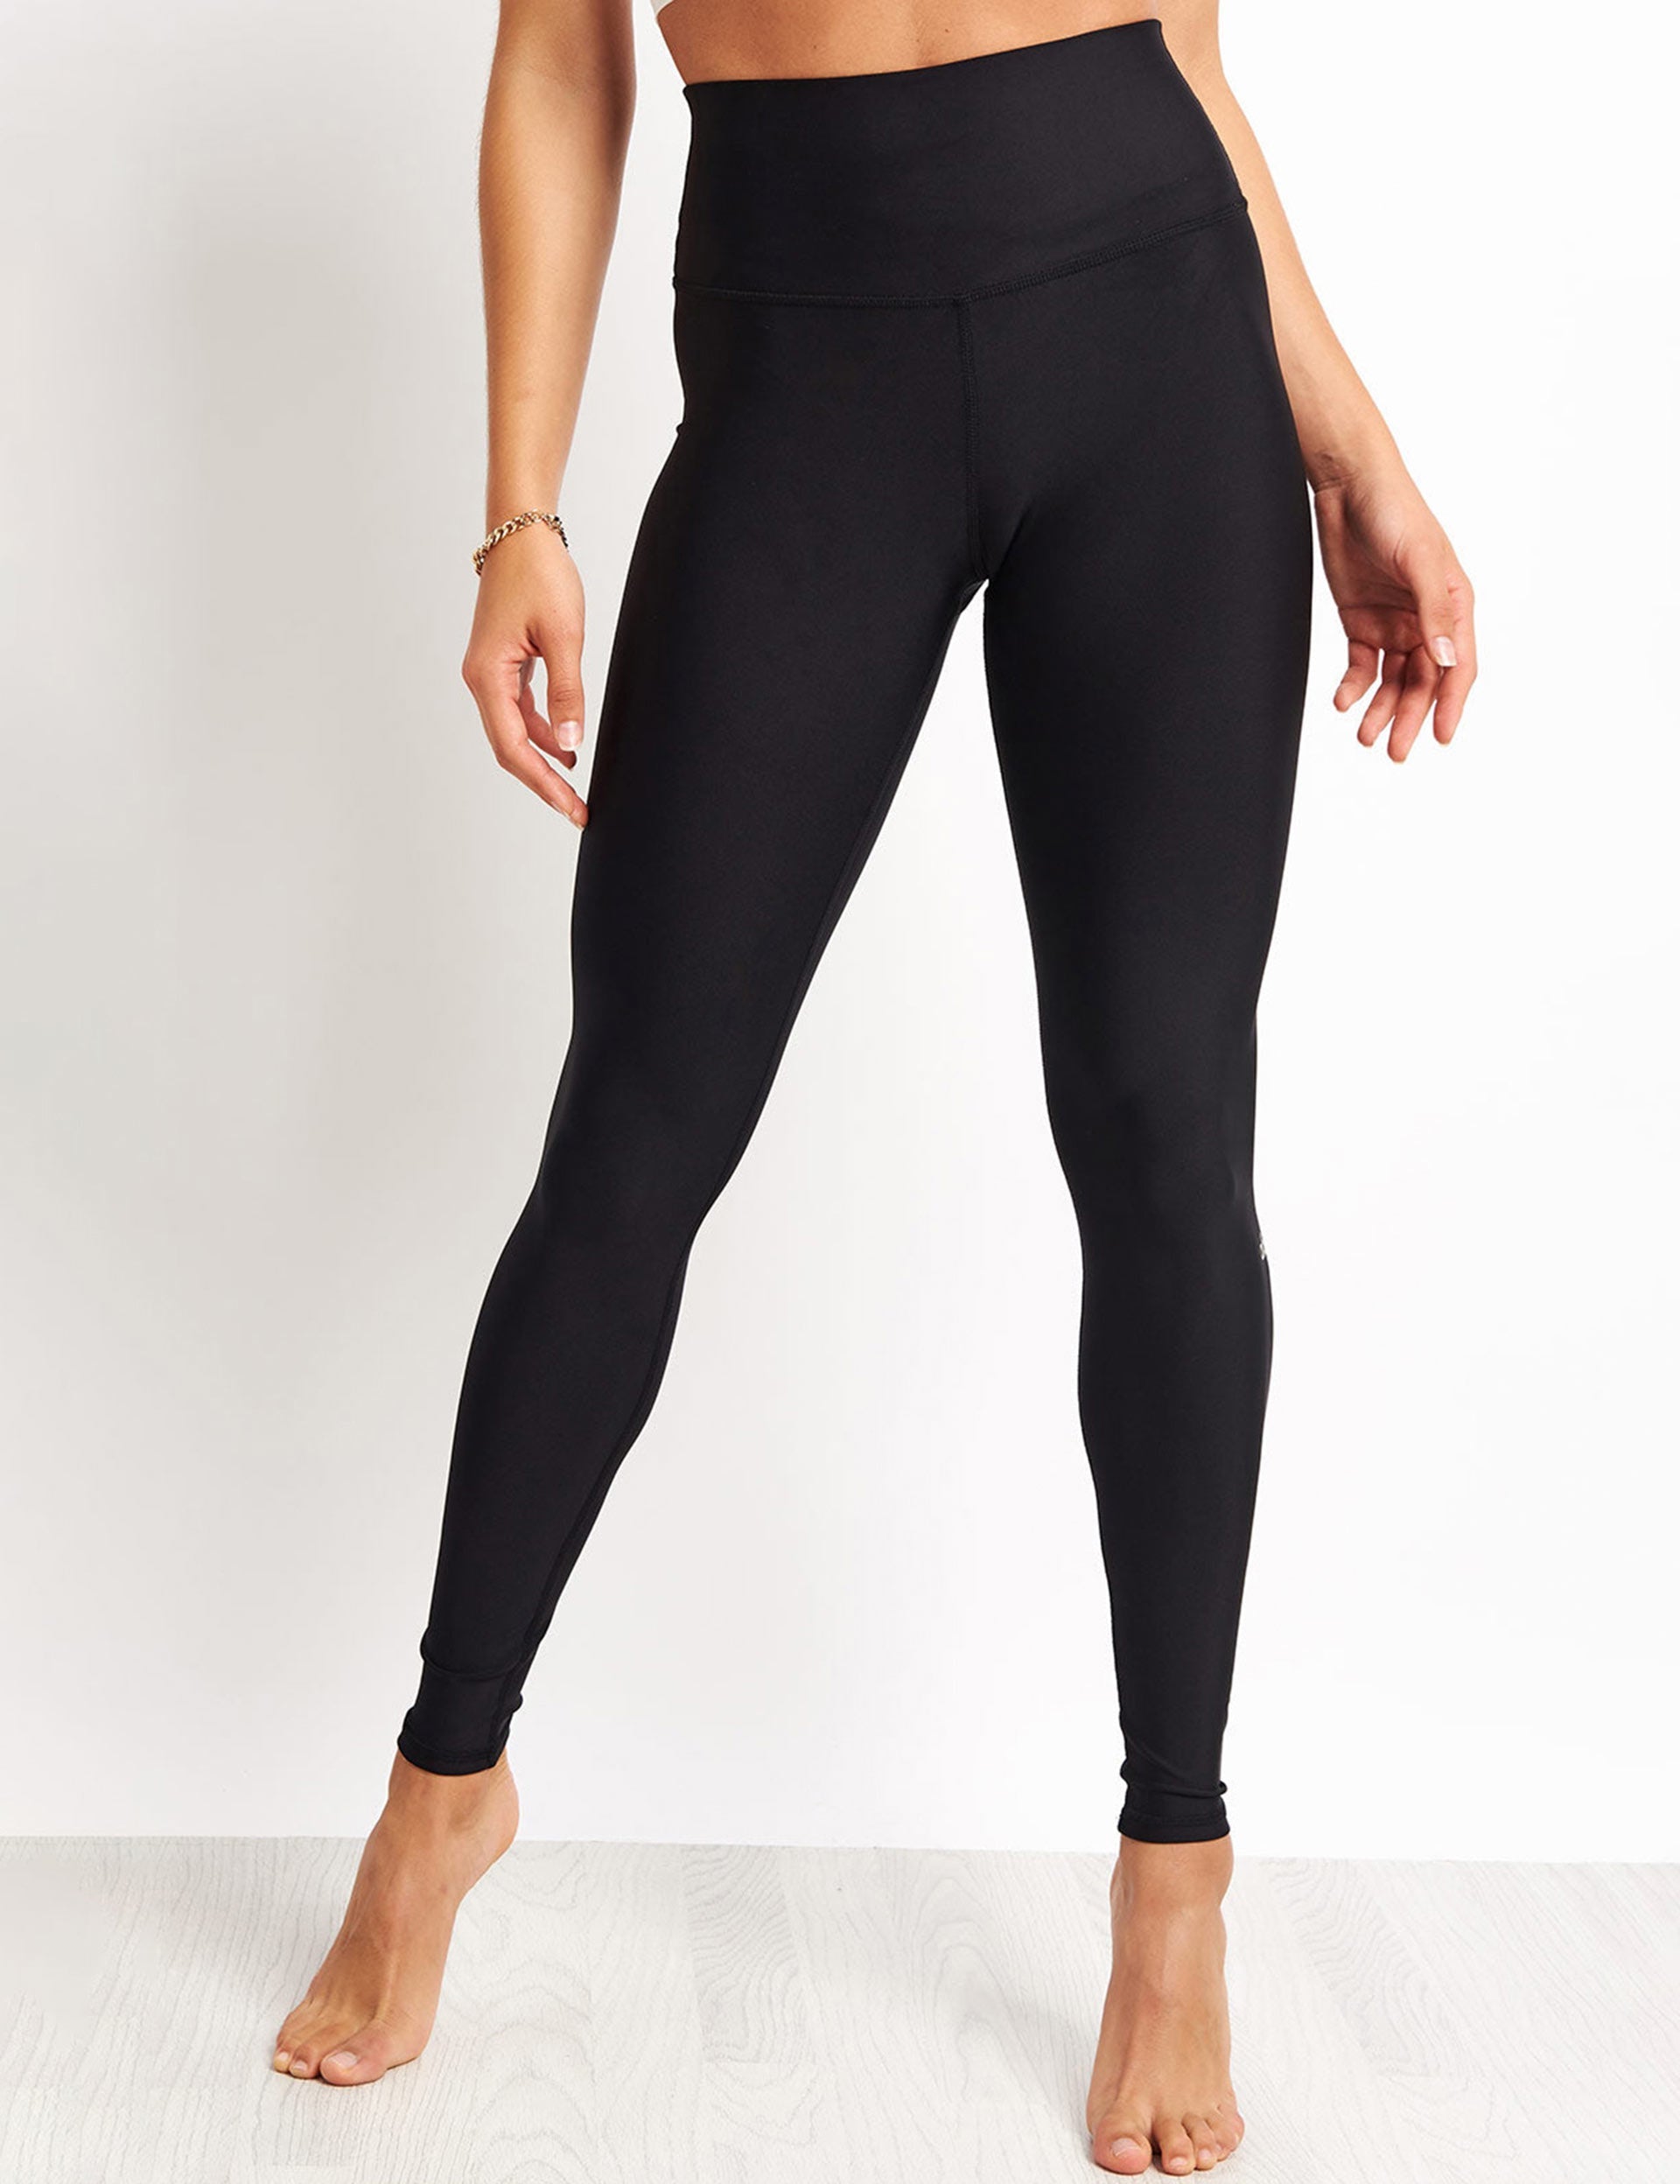 alo Airlift 7/8 High Waist Legging in Anthracite